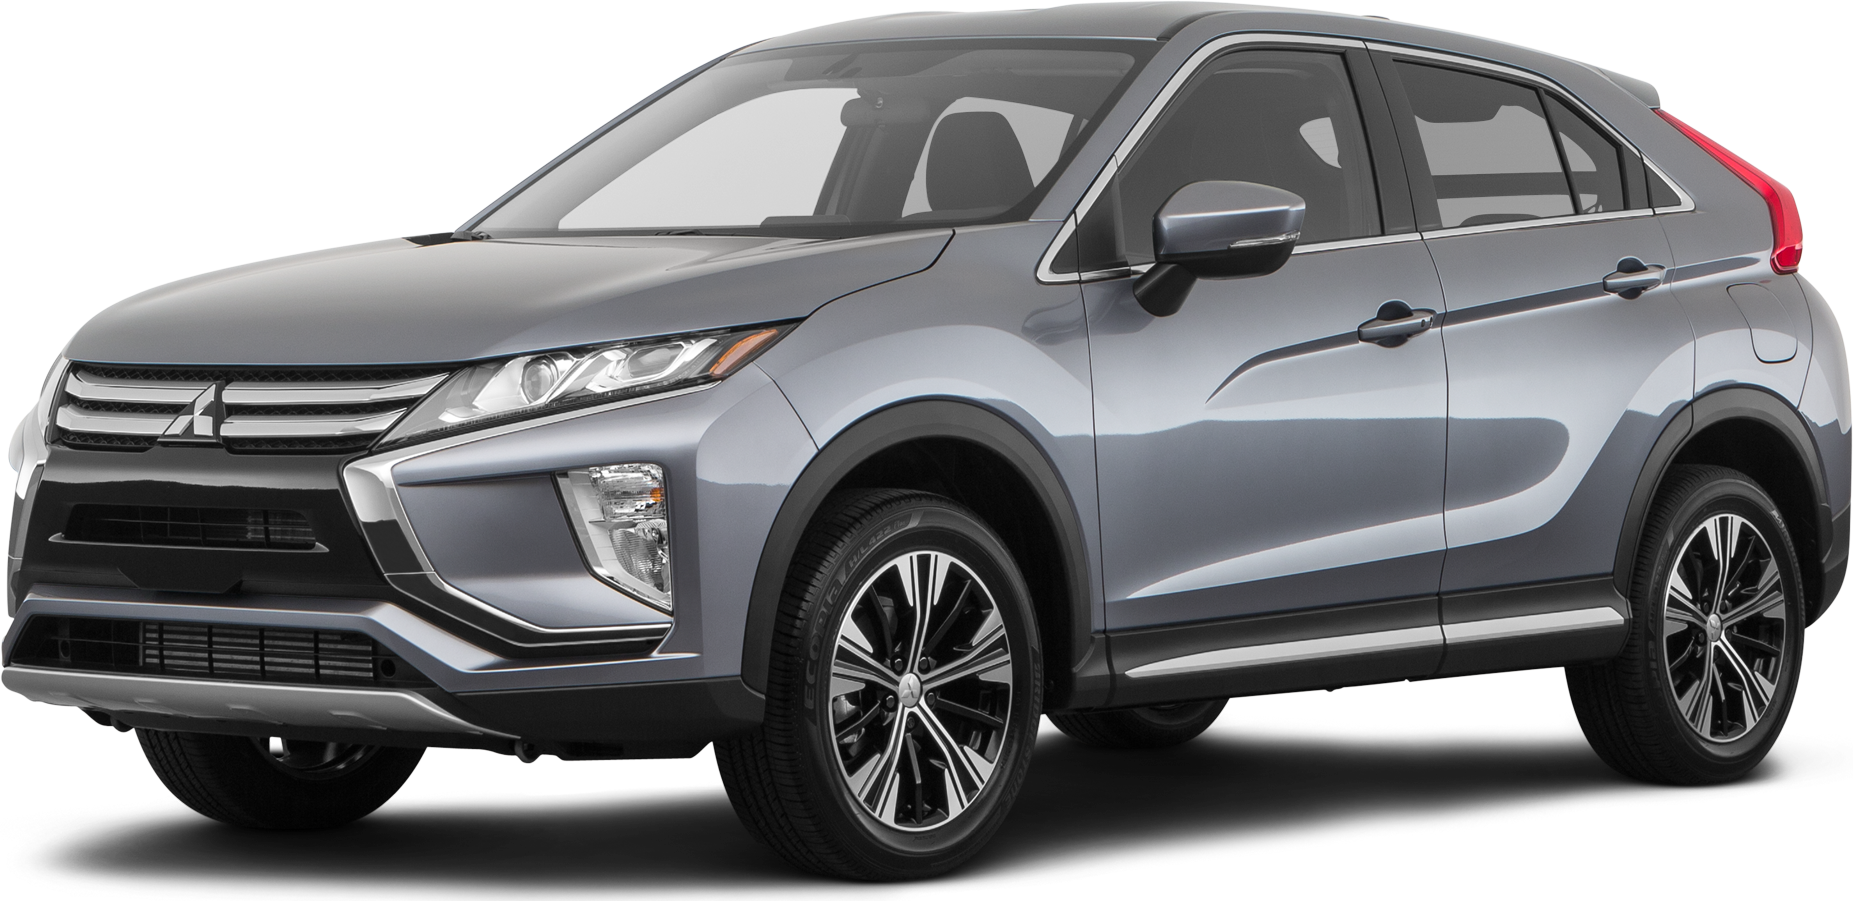 2018 Mitsubishi Eclipse Cross Specs and Features